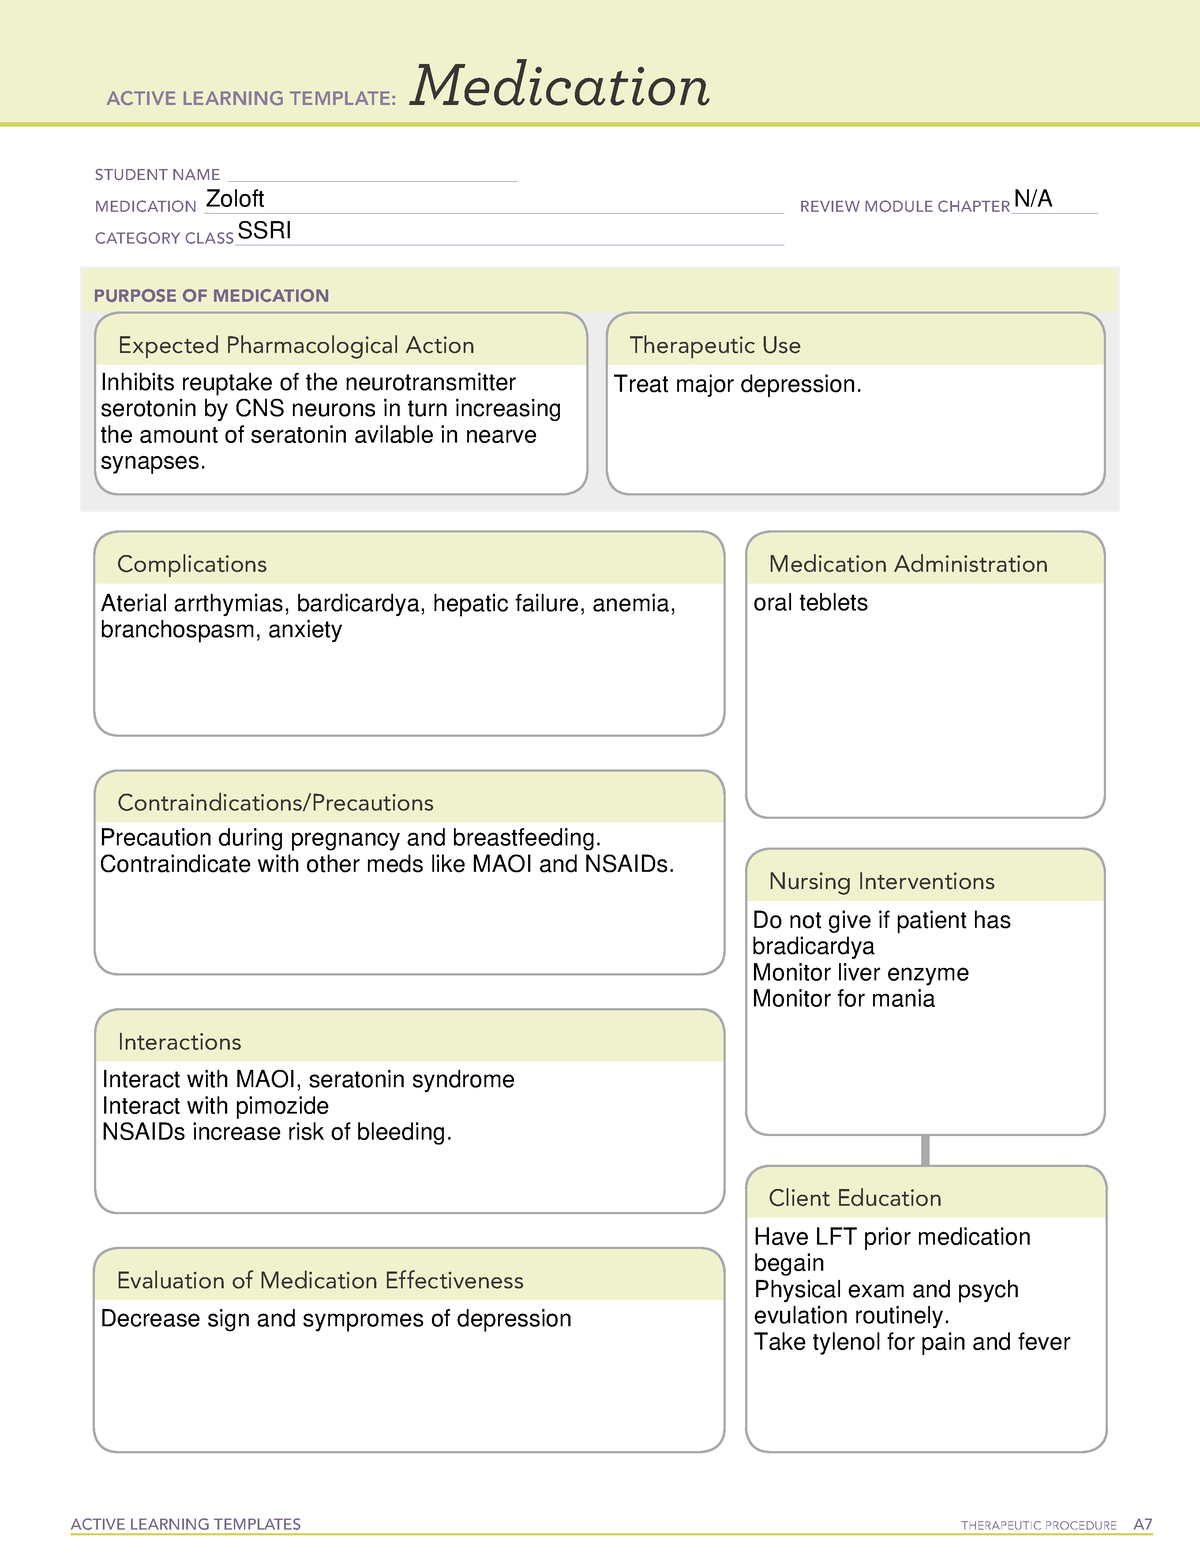 zoloft-medication-template-from-ati-active-learning-templates